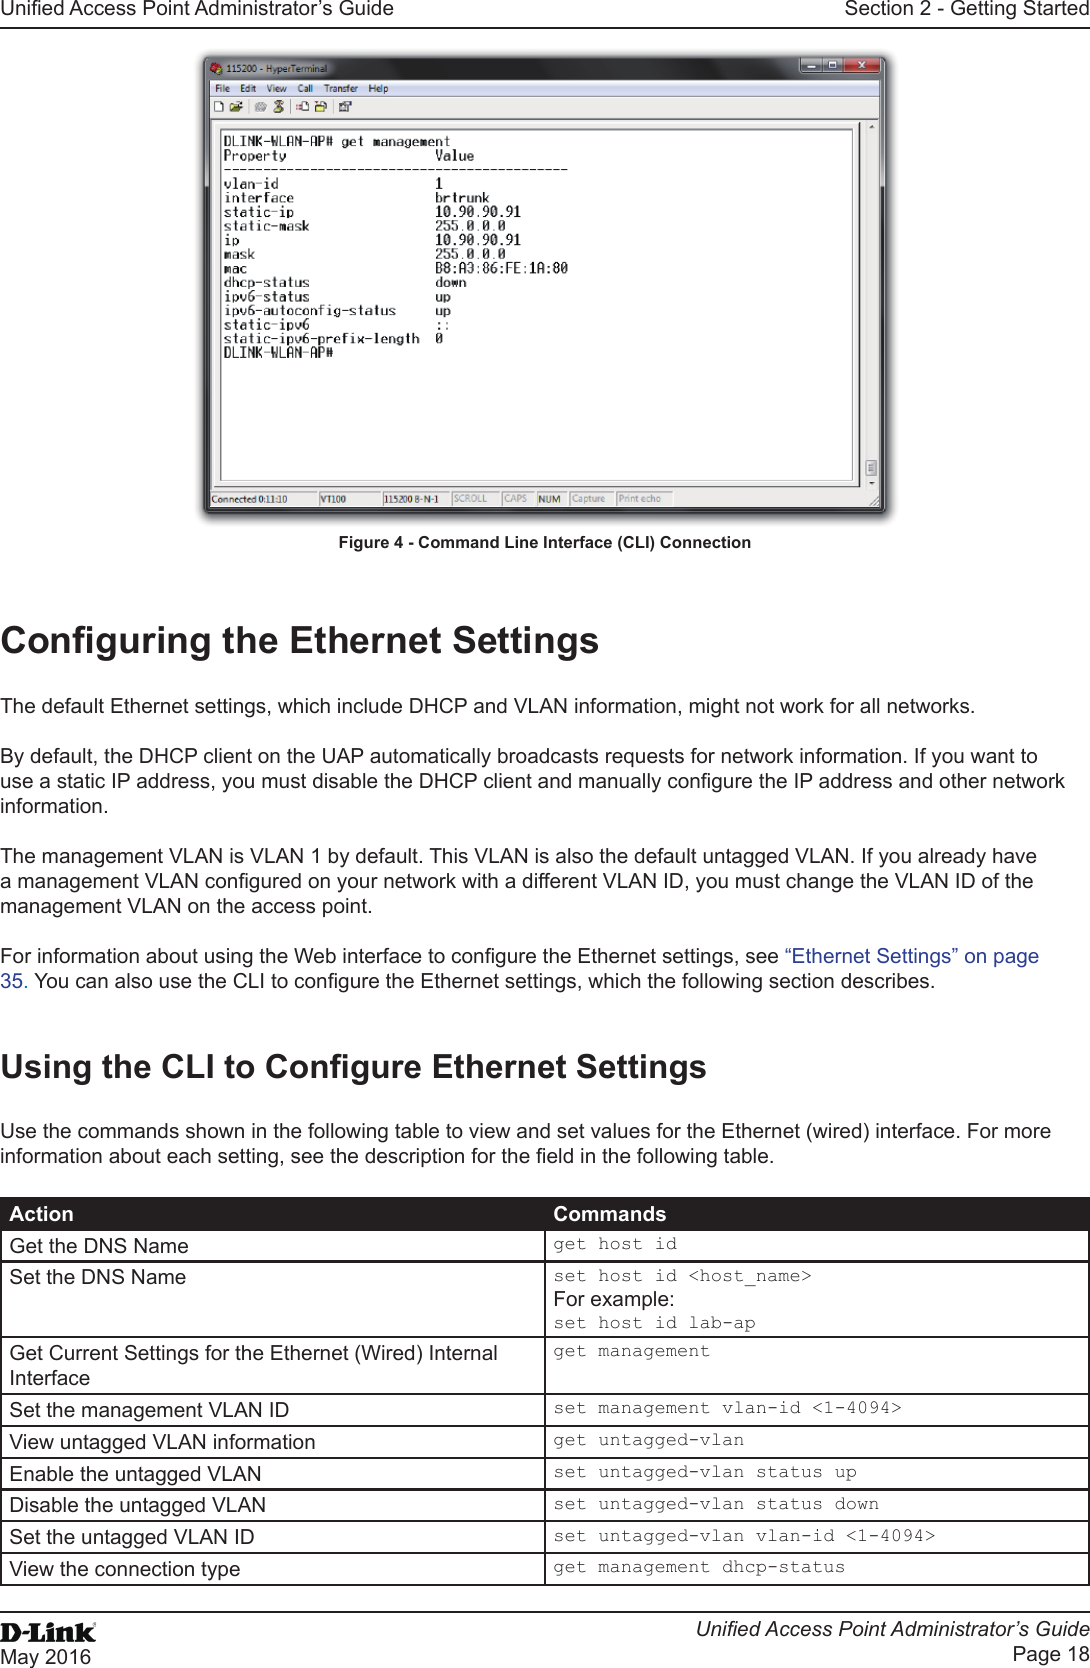 Unied Access Point Administrator’s GuideUnied Access Point Administrator’s GuidePage 18May 2016Section 2 - Getting StartedFigure 4 - Command Line Interface (CLI) ConnectionConguring the Ethernet SettingsThe default Ethernet settings, which include DHCP and VLAN information, might not work for all networks. By default, the DHCP client on the UAP automatically broadcasts requests for network information. If you want to use a static IP address, you must disable the DHCP client and manually congure the IP address and other network information.The management VLAN is VLAN 1 by default. This VLAN is also the default untagged VLAN. If you already have a management VLAN congured on your network with a different VLAN ID, you must change the VLAN ID of the management VLAN on the access point. For information about using the Web interface to congure the Ethernet settings, see “Ethernet Settings” on page 35. You can also use the CLI to congure the Ethernet settings, which the following section describes.Using the CLI to Congure Ethernet SettingsUse the commands shown in the following table to view and set values for the Ethernet (wired) interface. For more information about each setting, see the description for the eld in the following table.Action CommandsGet the DNS Name get host idSet the DNS Name set host id &lt;host_name&gt;For example:set host id lab-apGet Current Settings for the Ethernet (Wired) Internal Interfaceget managementSet the management VLAN ID set management vlan-id &lt;1-4094&gt;View untagged VLAN information get untagged-vlanEnable the untagged VLAN set untagged-vlan status upDisable the untagged VLAN set untagged-vlan status downSet the untagged VLAN ID set untagged-vlan vlan-id &lt;1-4094&gt;View the connection type get management dhcp-status